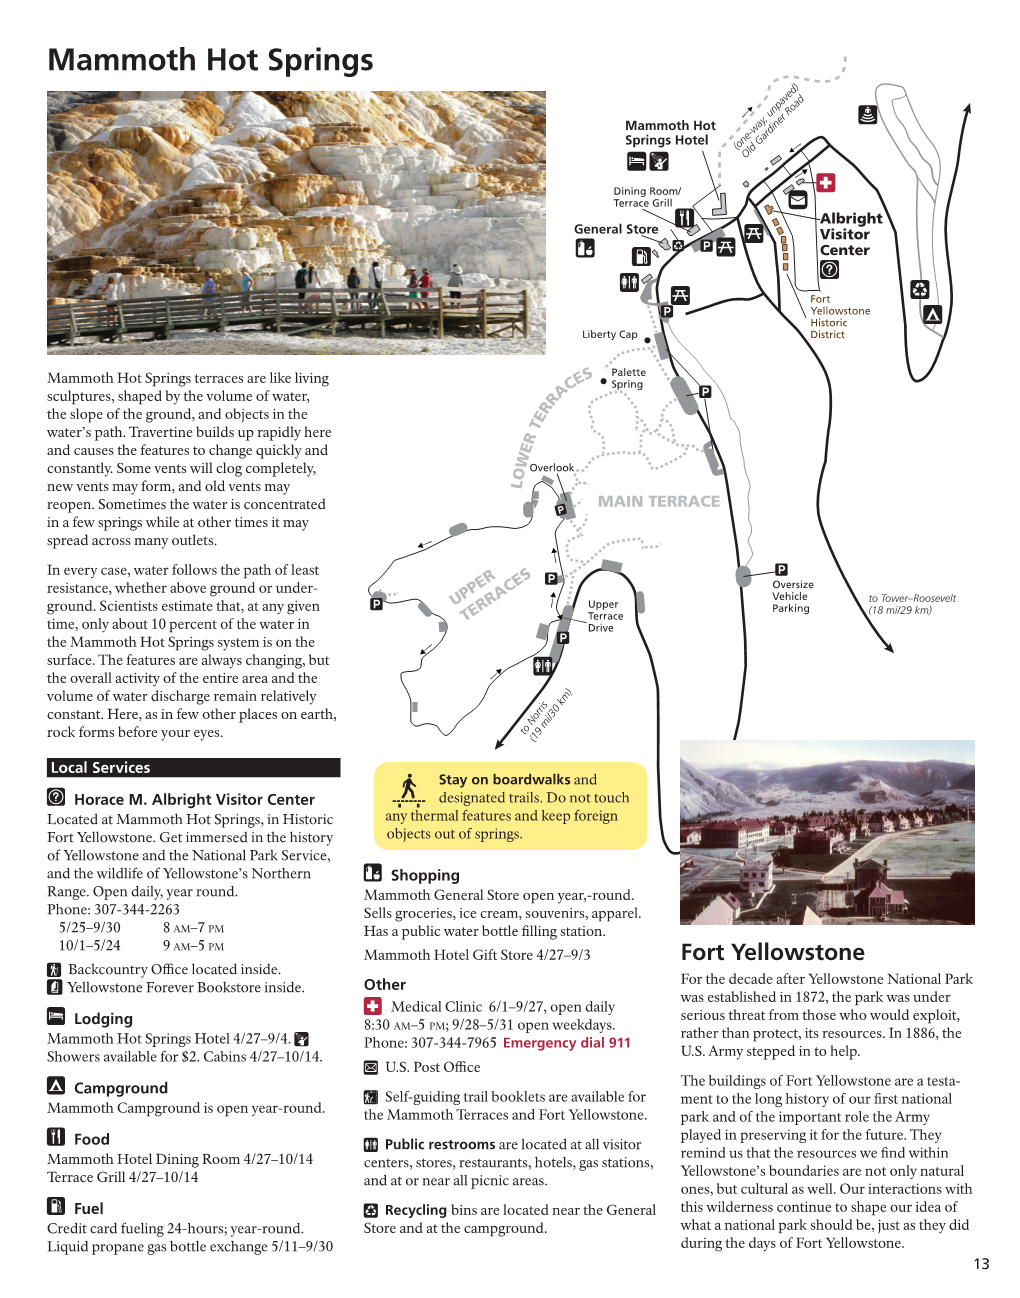 Mammoth Hot Springs Activities for 2018